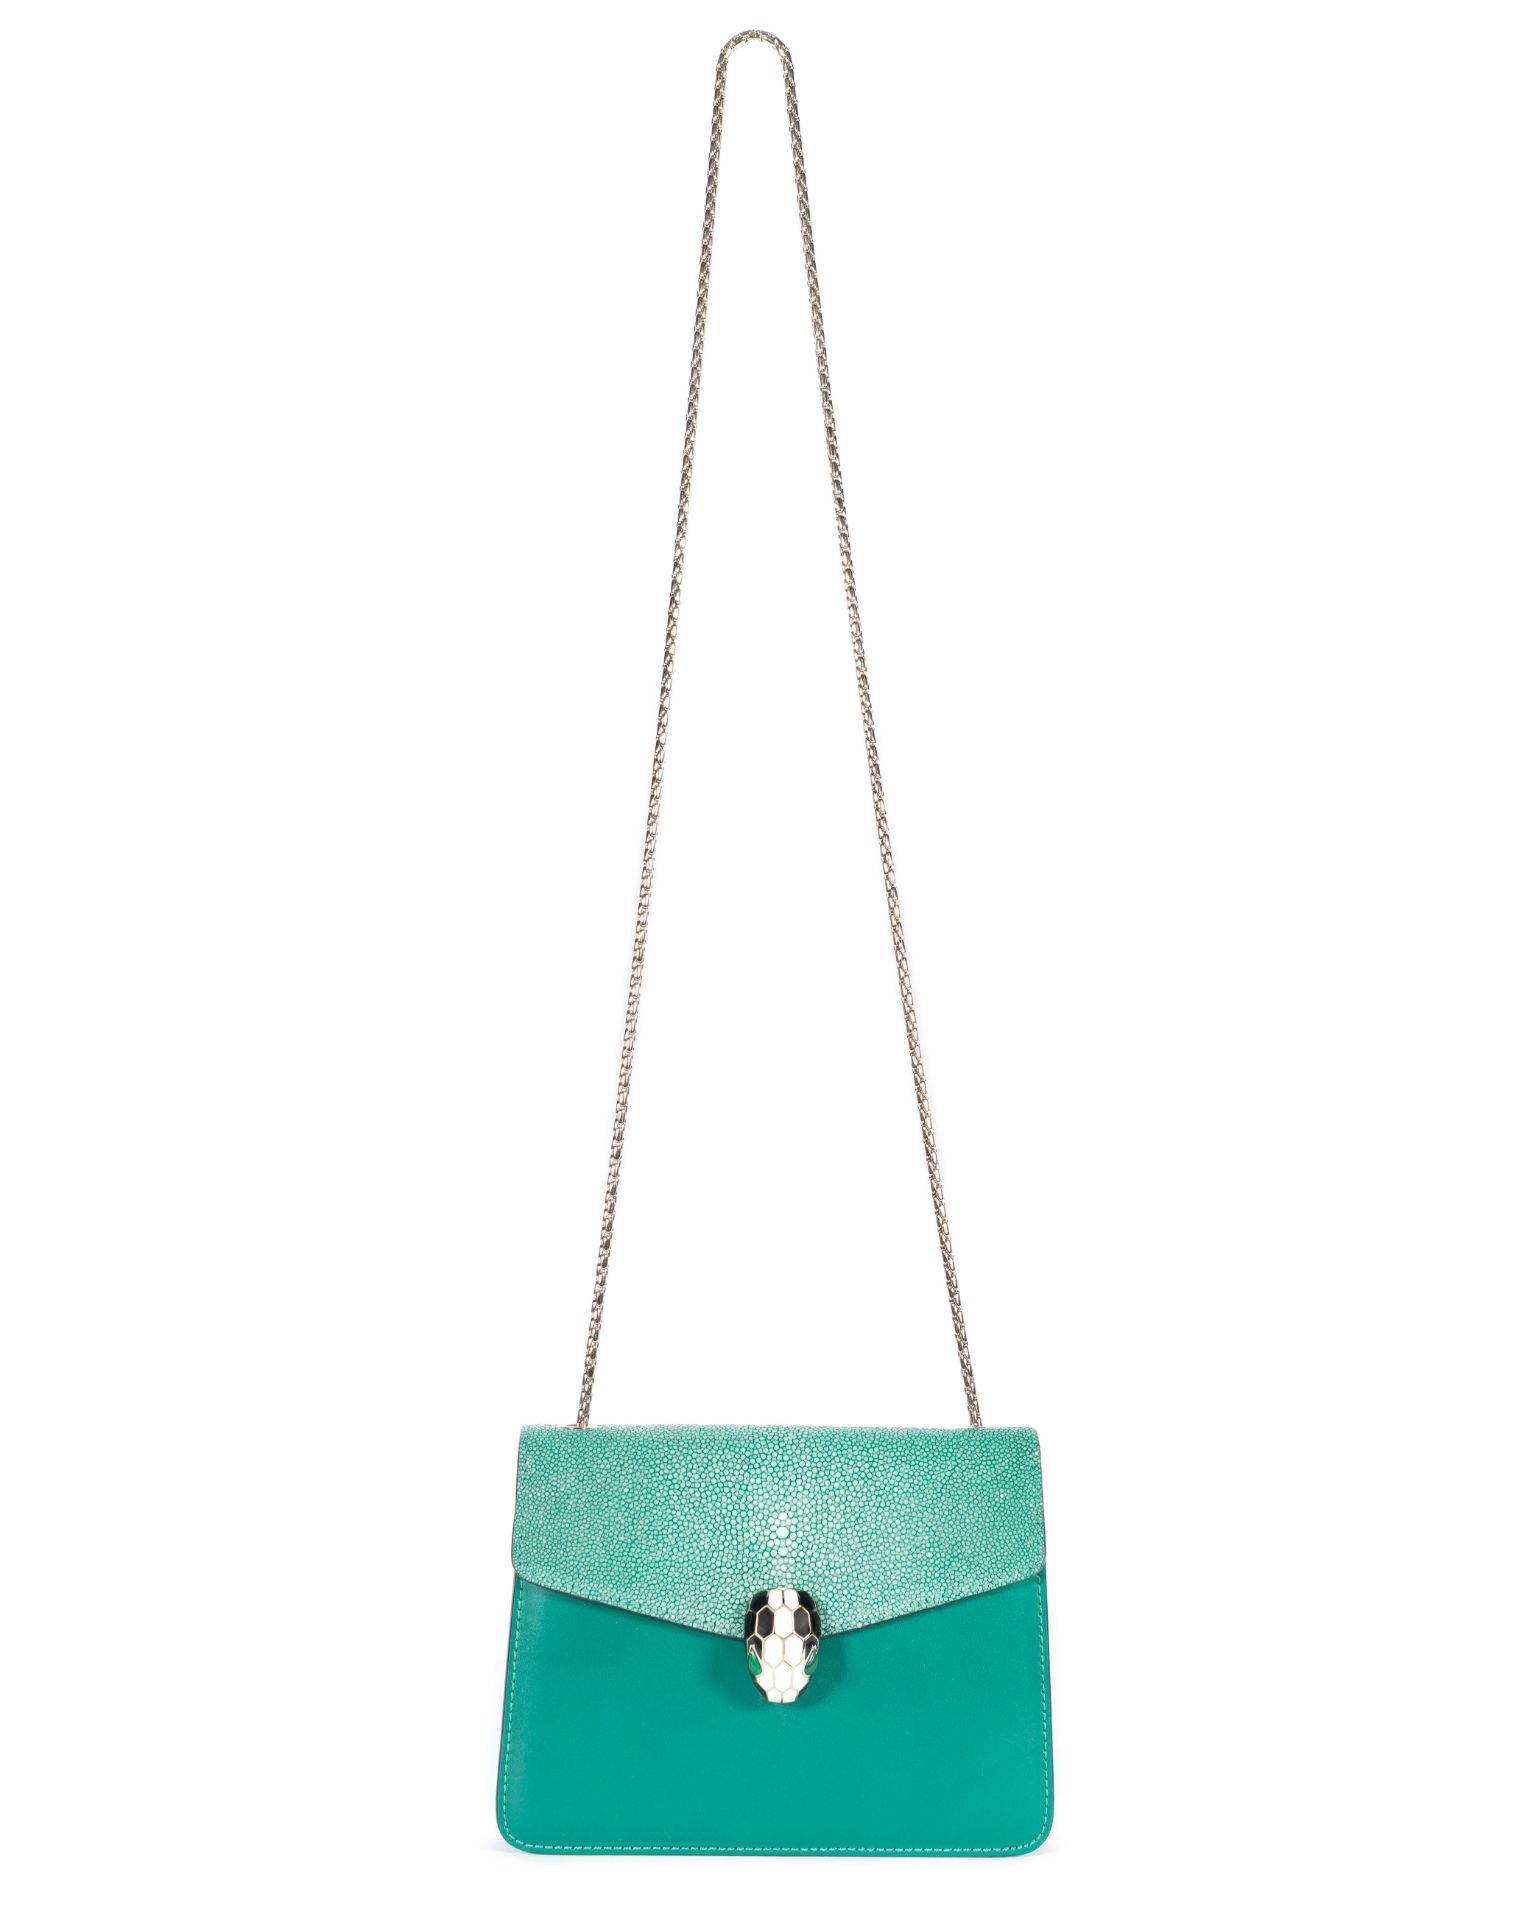 Emerald Green Serpeti Forever Bag, Bulgari, 2010s, (Includes leather backed mirror and dust bag )